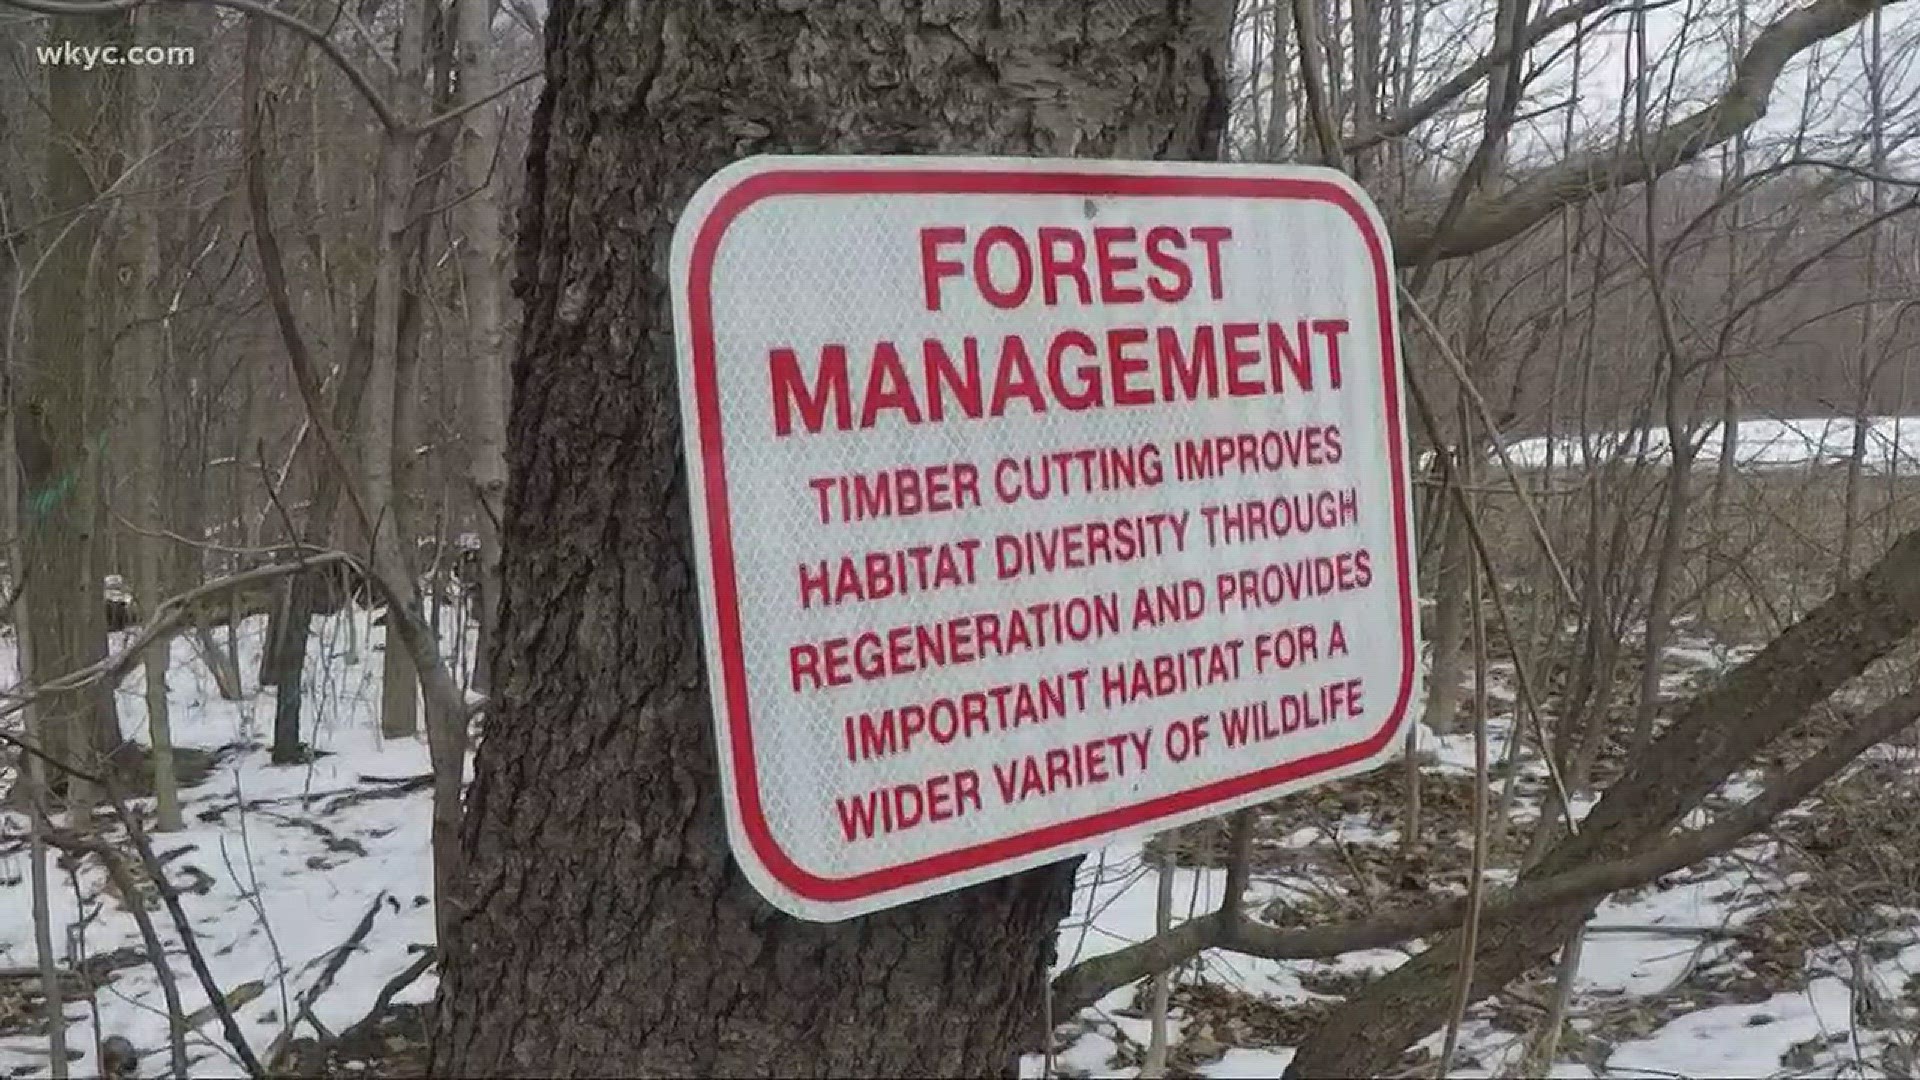 Tree logging causes debate among residents in Geauga County